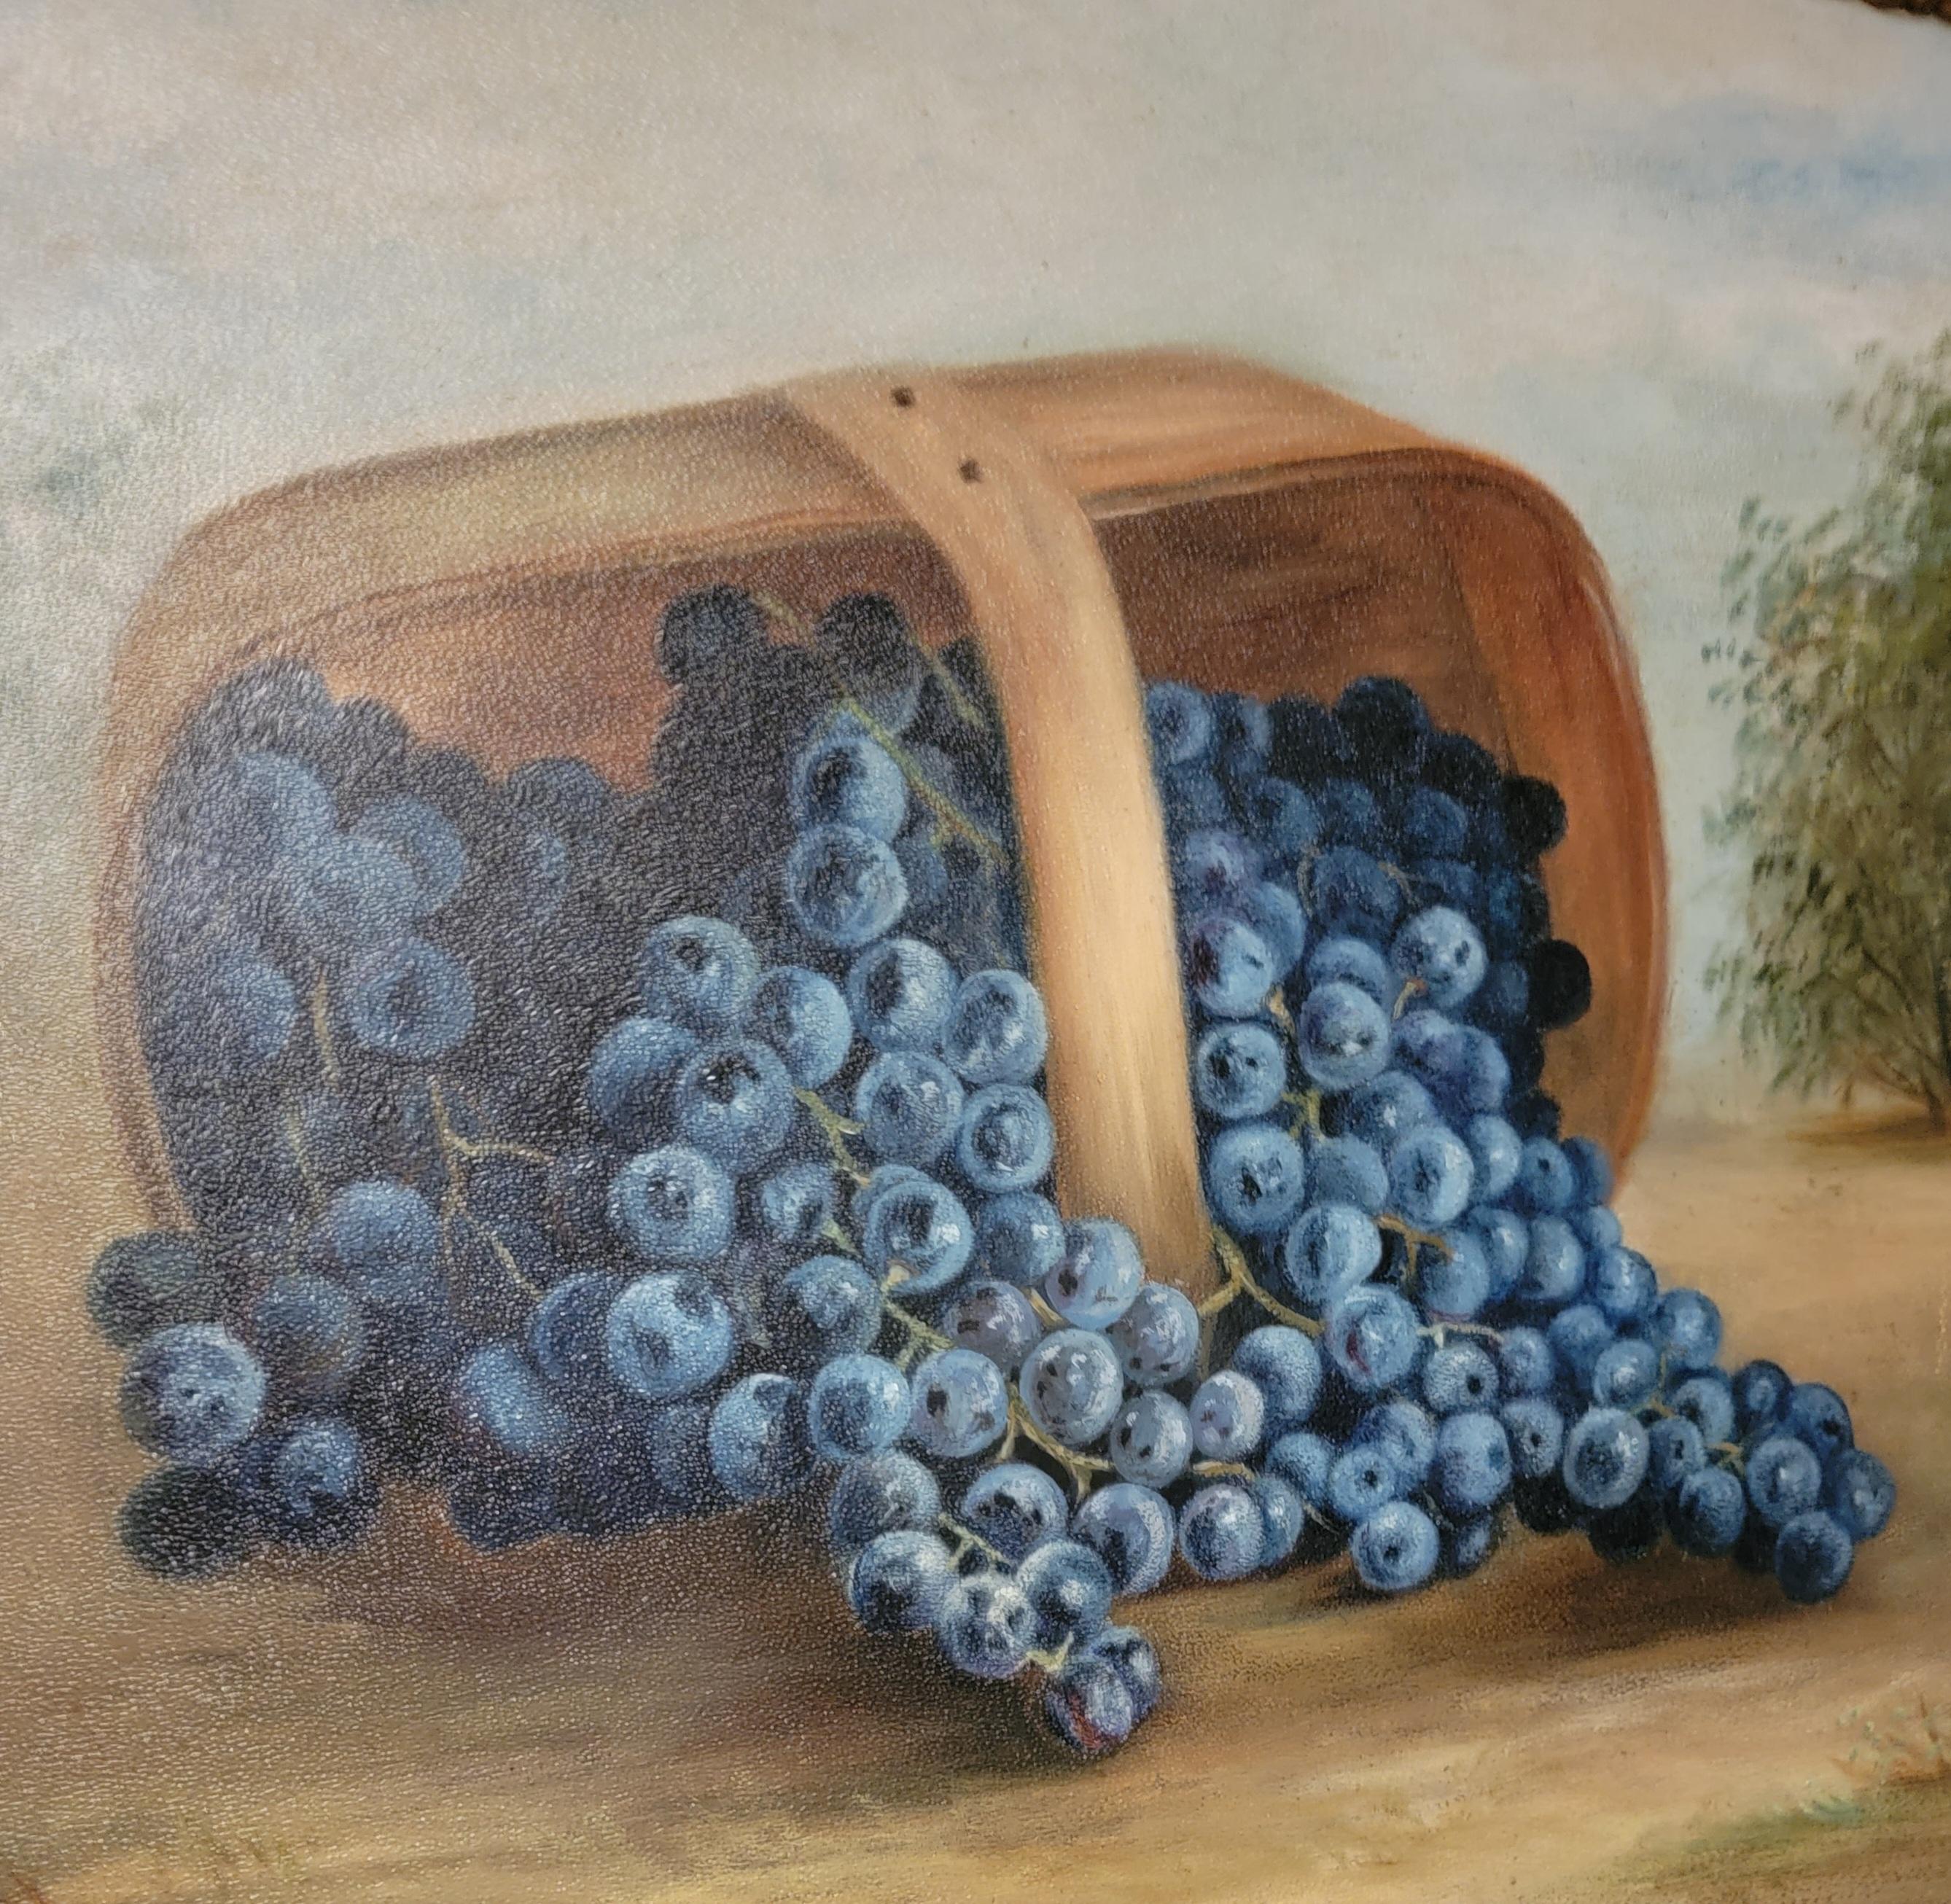 19th C Oil Painting of an Exaggerated Folky Basket of Blue Berries. Framed in an Ornate Victorian Wood Frame. Signed AML on bottom right of painting.